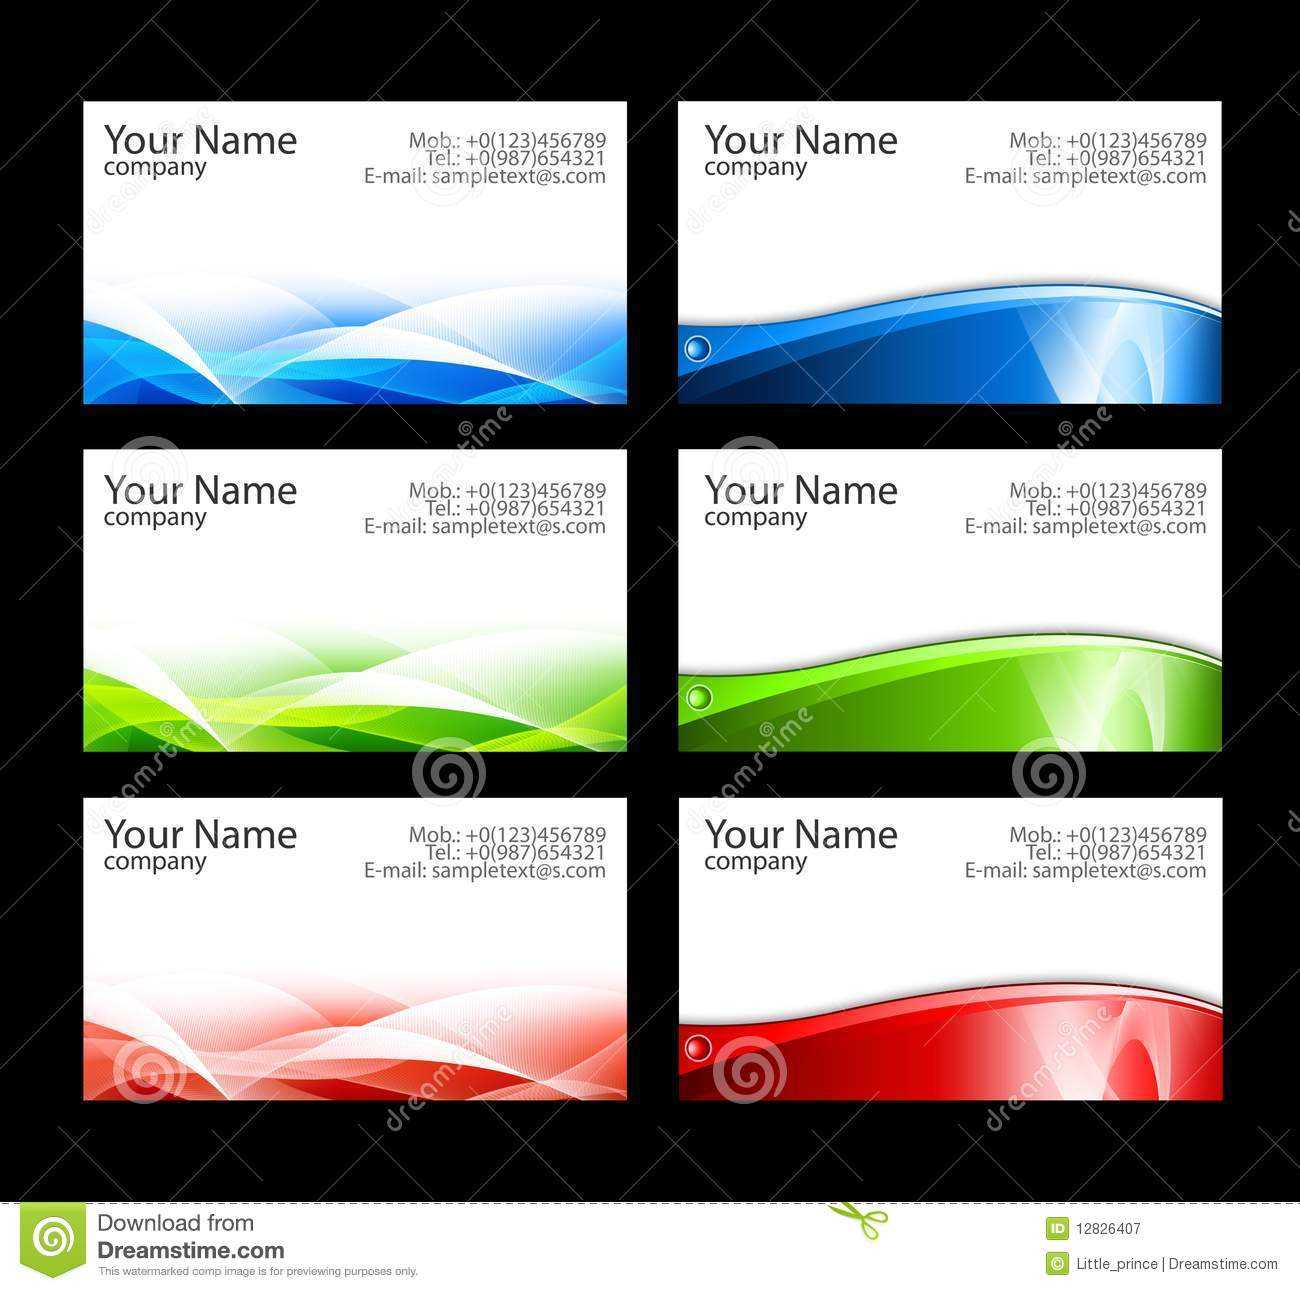 15 Free Avery Business Card Templates Images – Free Business For Calling Card Free Template